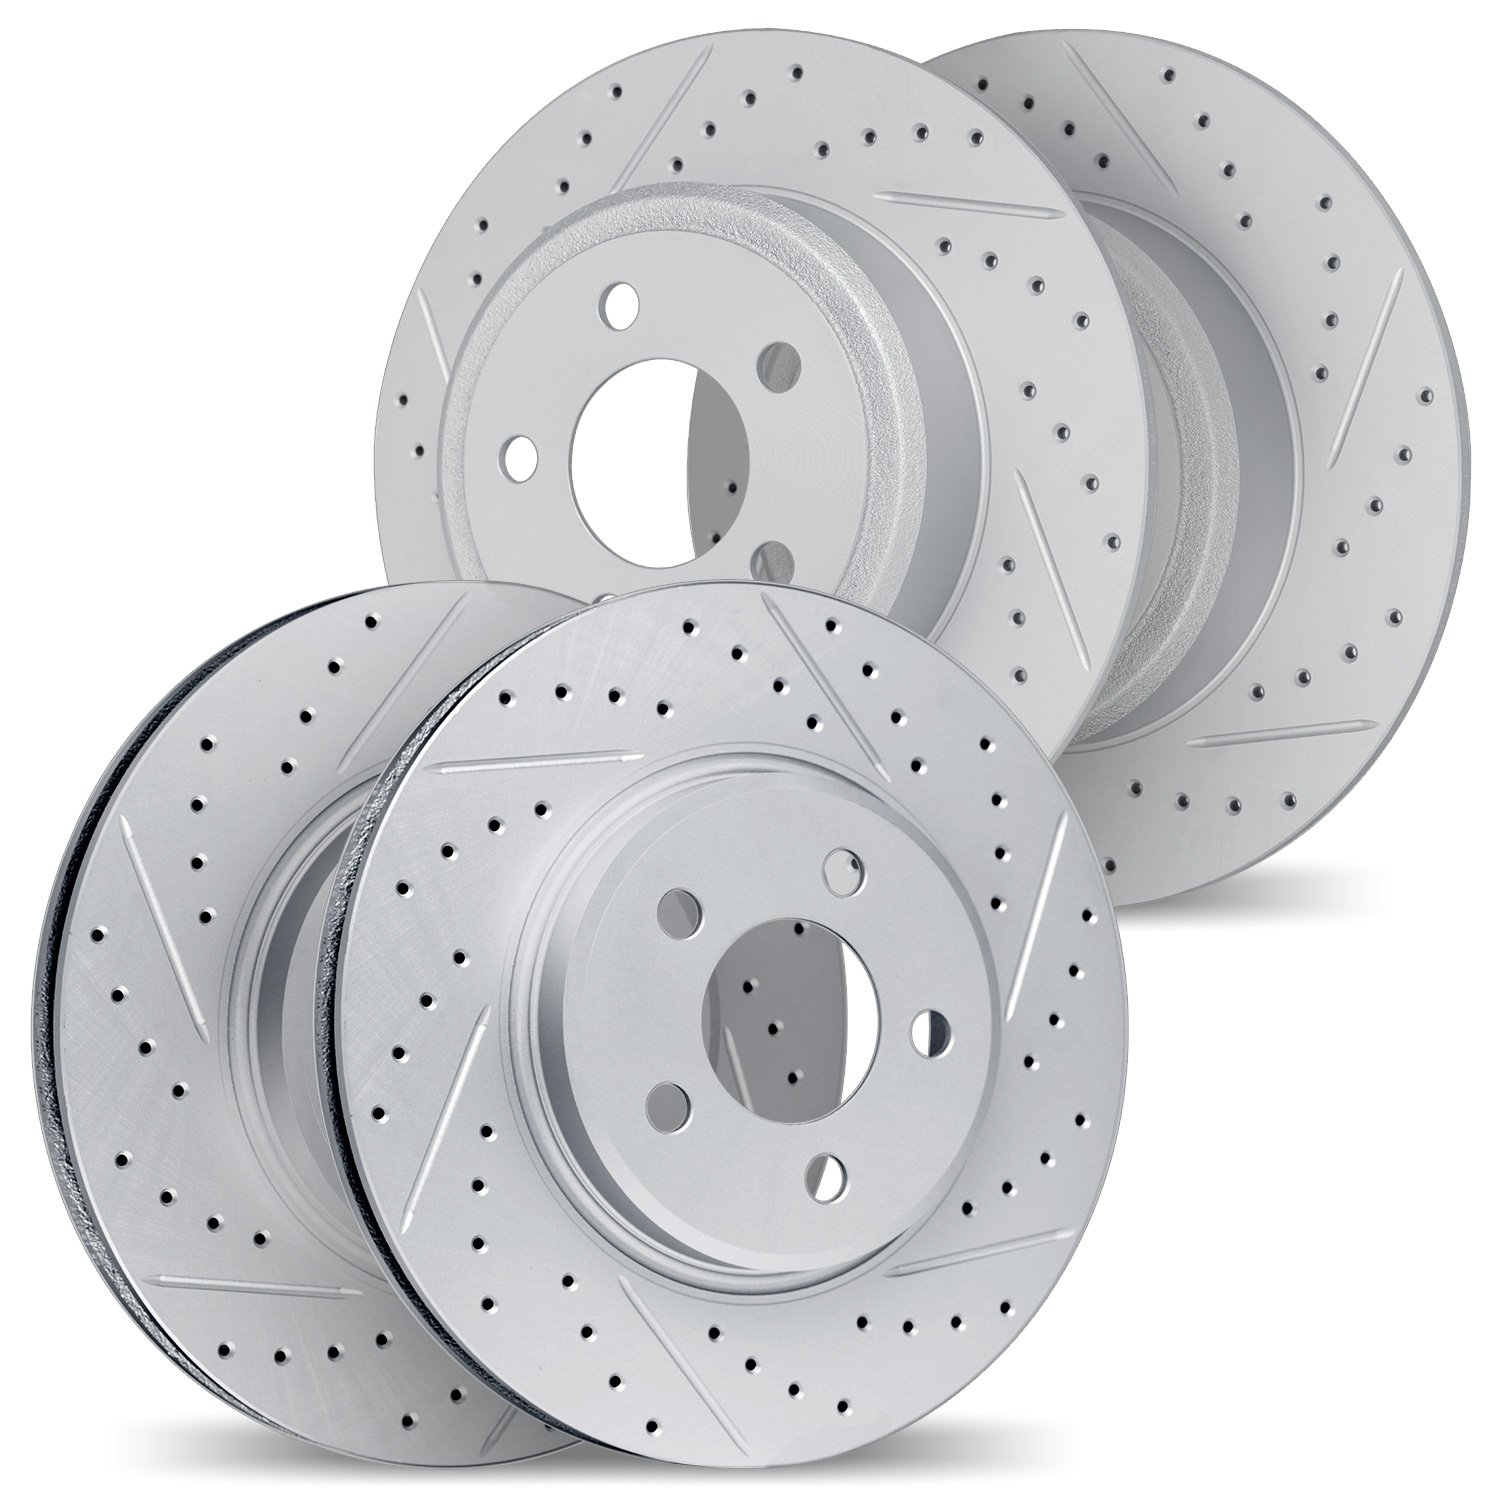 2004-58011 Geoperformance Drilled/Slotted Brake Rotors, 1999-2003 Acura/Honda, Position: Front and Rear